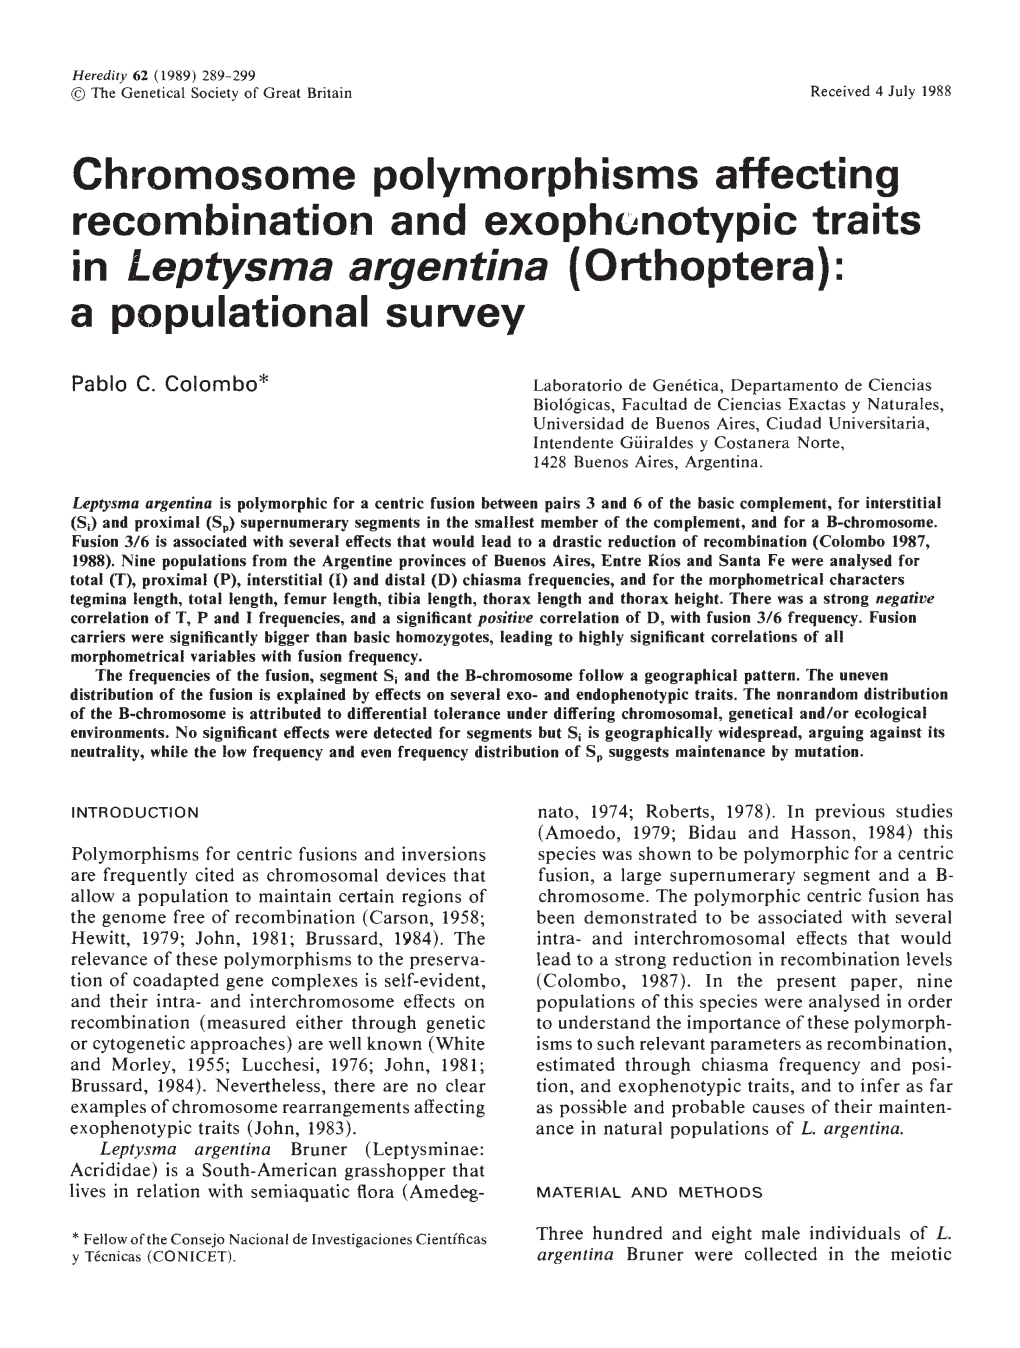 Recombination and Exophnotypic Traits in Leptysma Argentina (Orthoptera): a Populational Survey